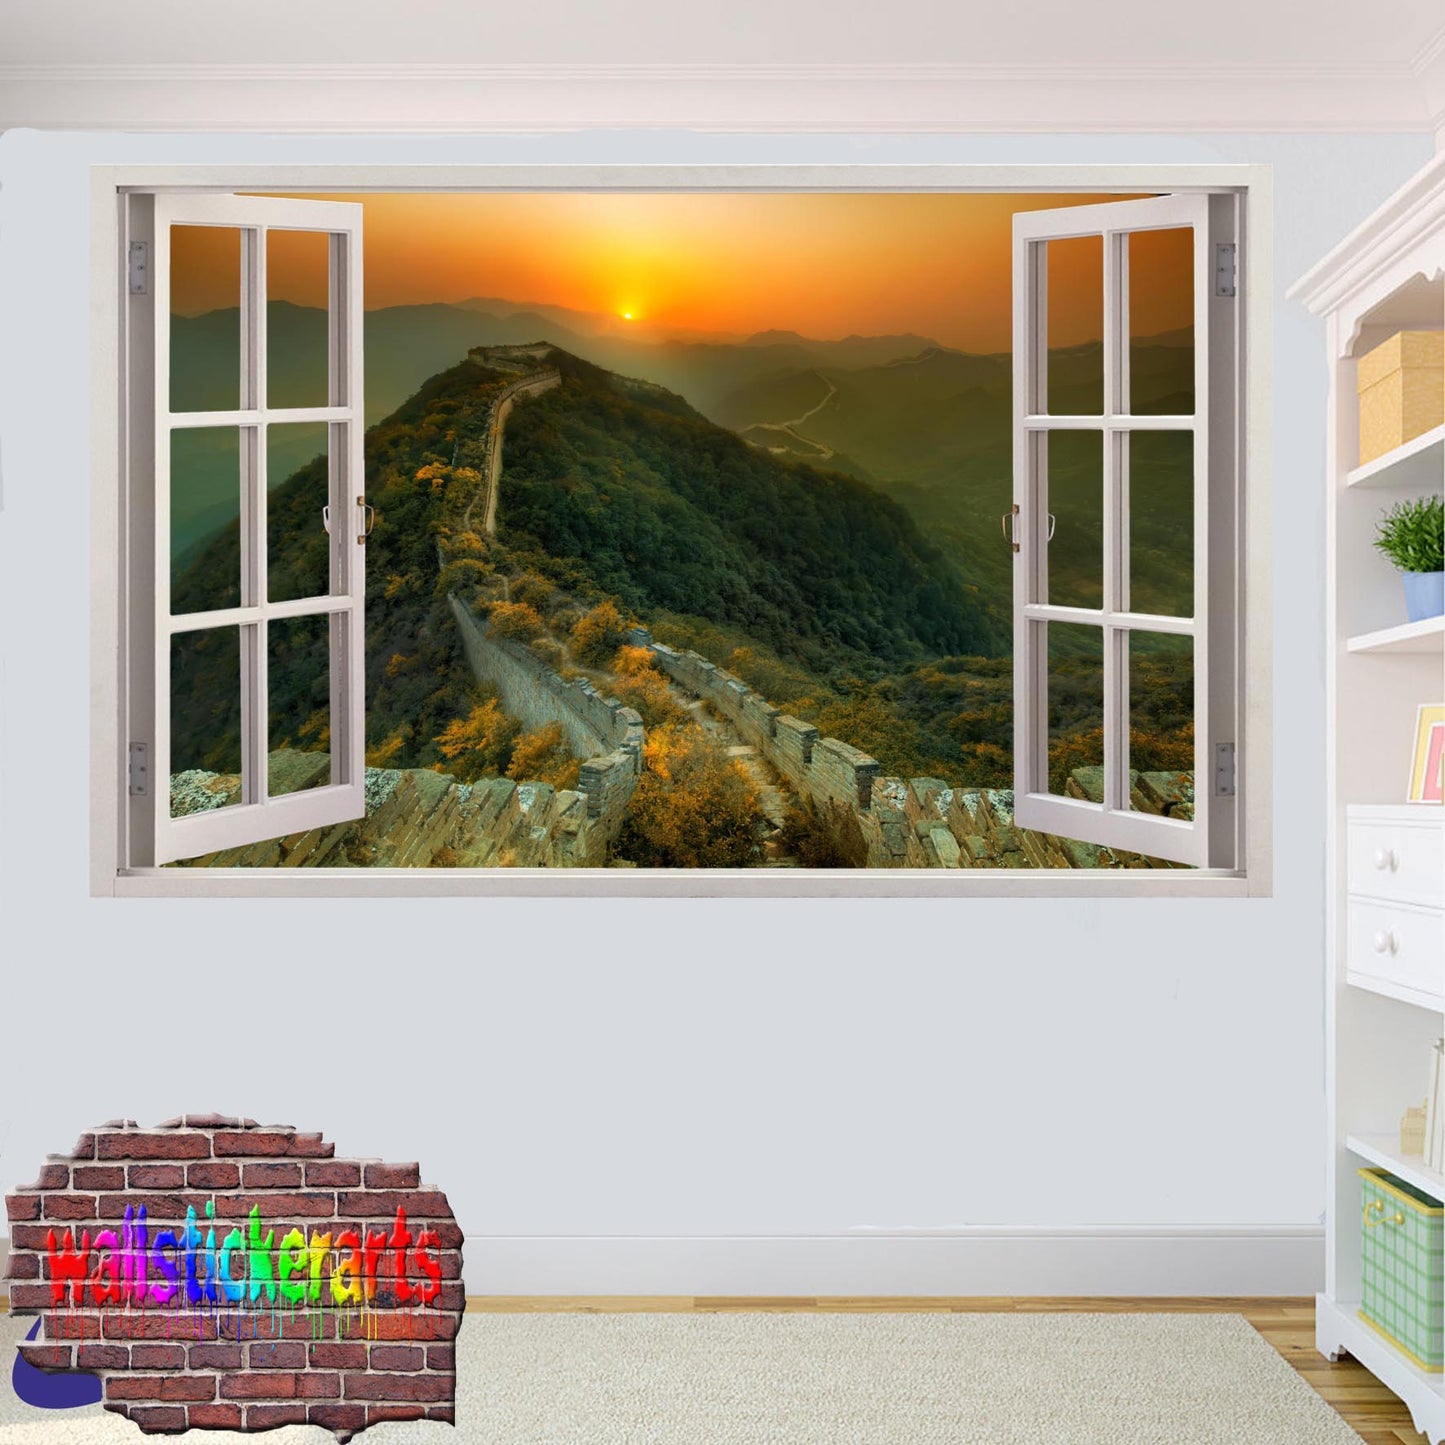 Great Wall China 3d Art Window Effect Wall Sticker Room Office Nursery Shop Decoration Decal Mural YL5